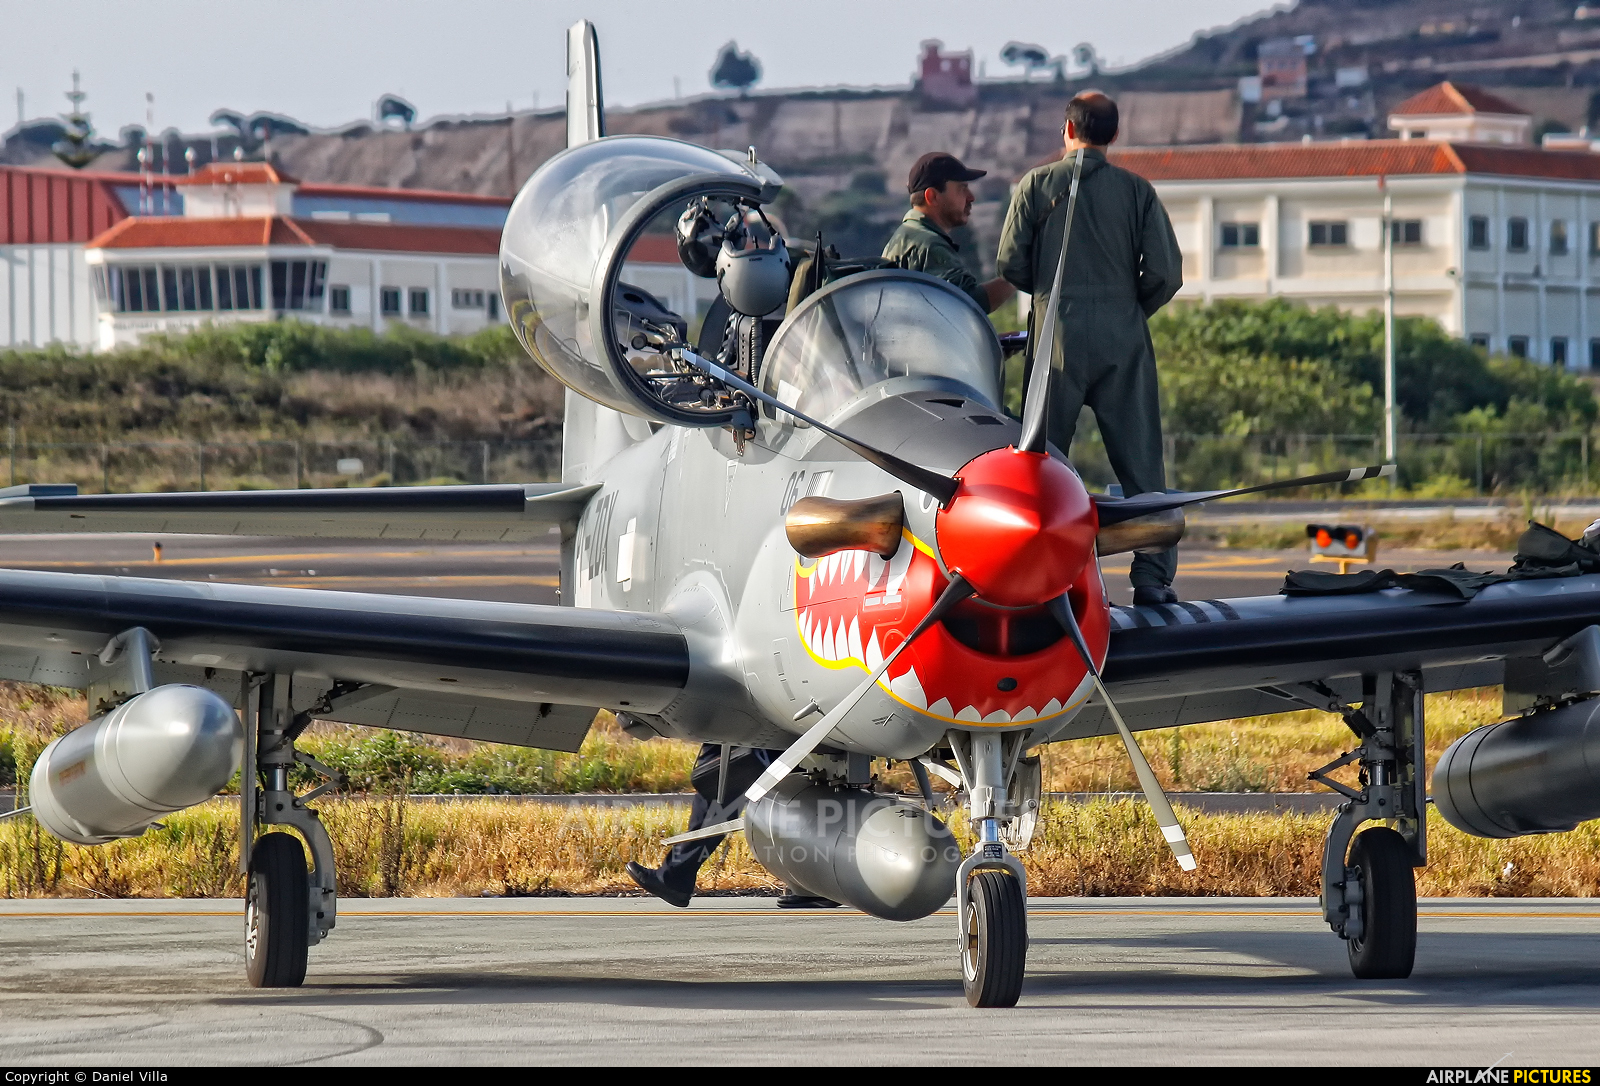 Indonesia - Air Force PT-ZEJ aircraft at Tenerife Norte - Los Rodeos